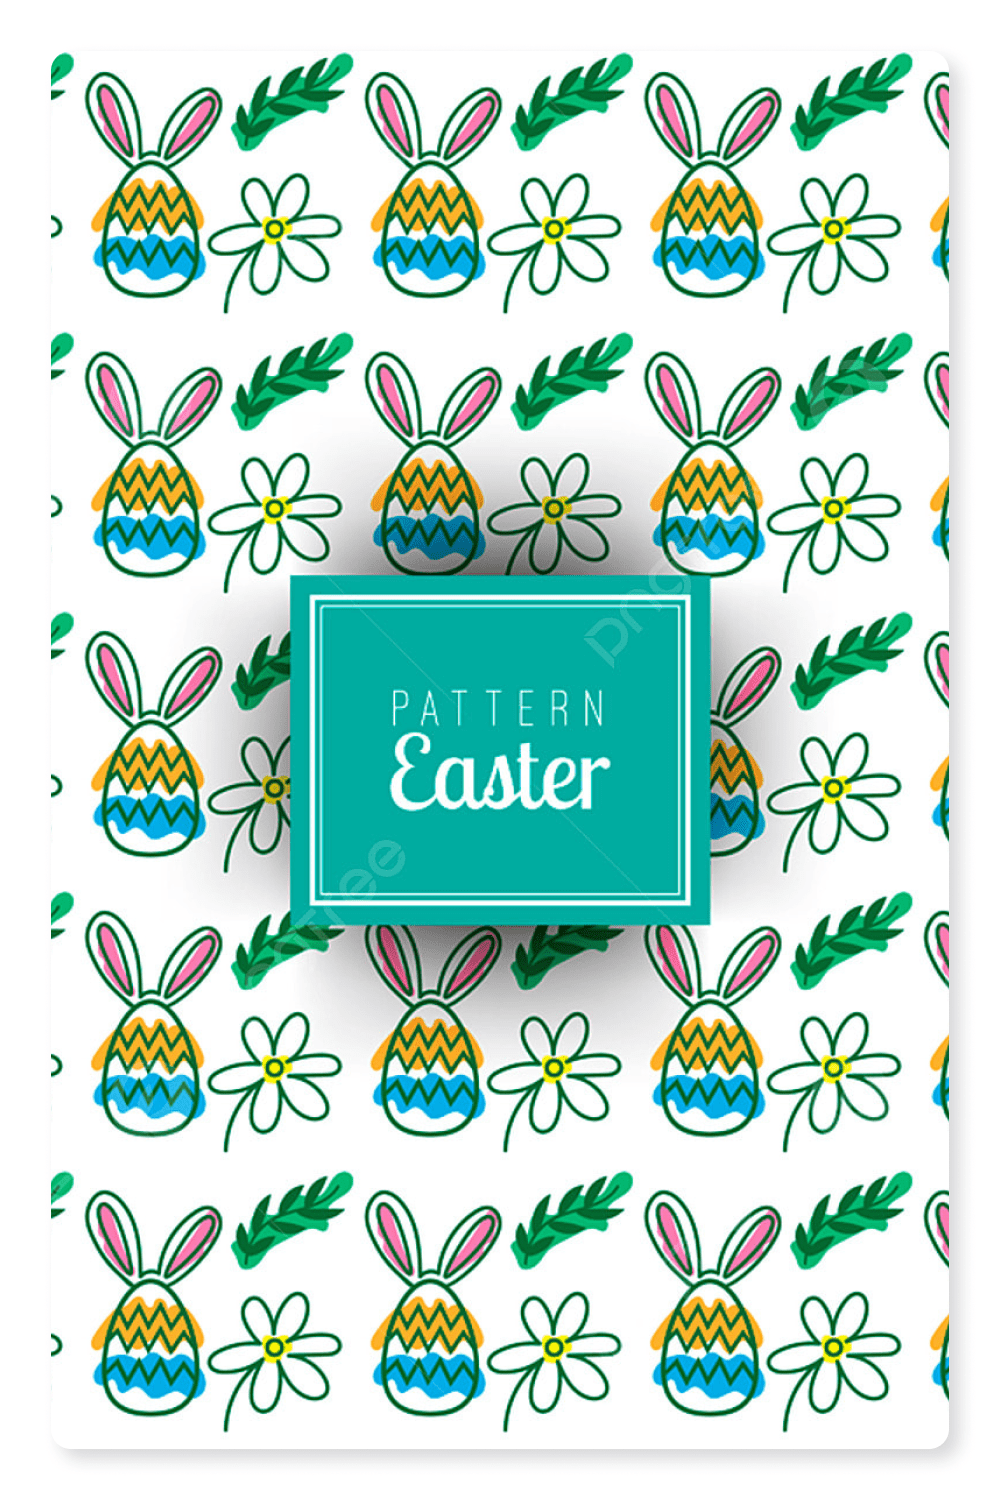 Seamless pattern with Easter eggs with bunny ears, flowers and leaves.